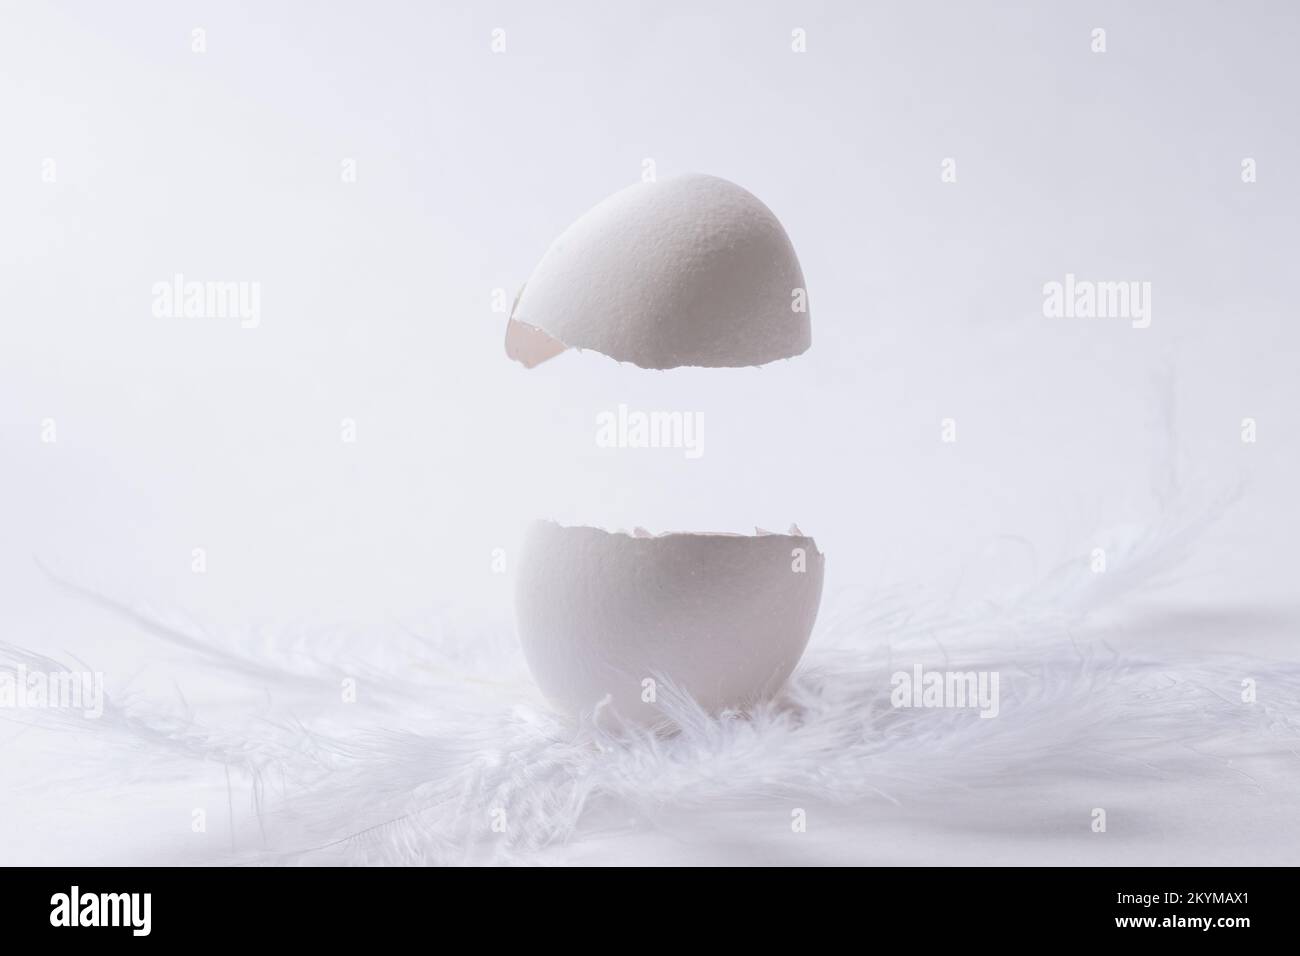 Cracked white natural Easter egg in feathers on a light background, copy space. Levitation of half of a cracked eggshell. Creative Easter concept Stock Photo